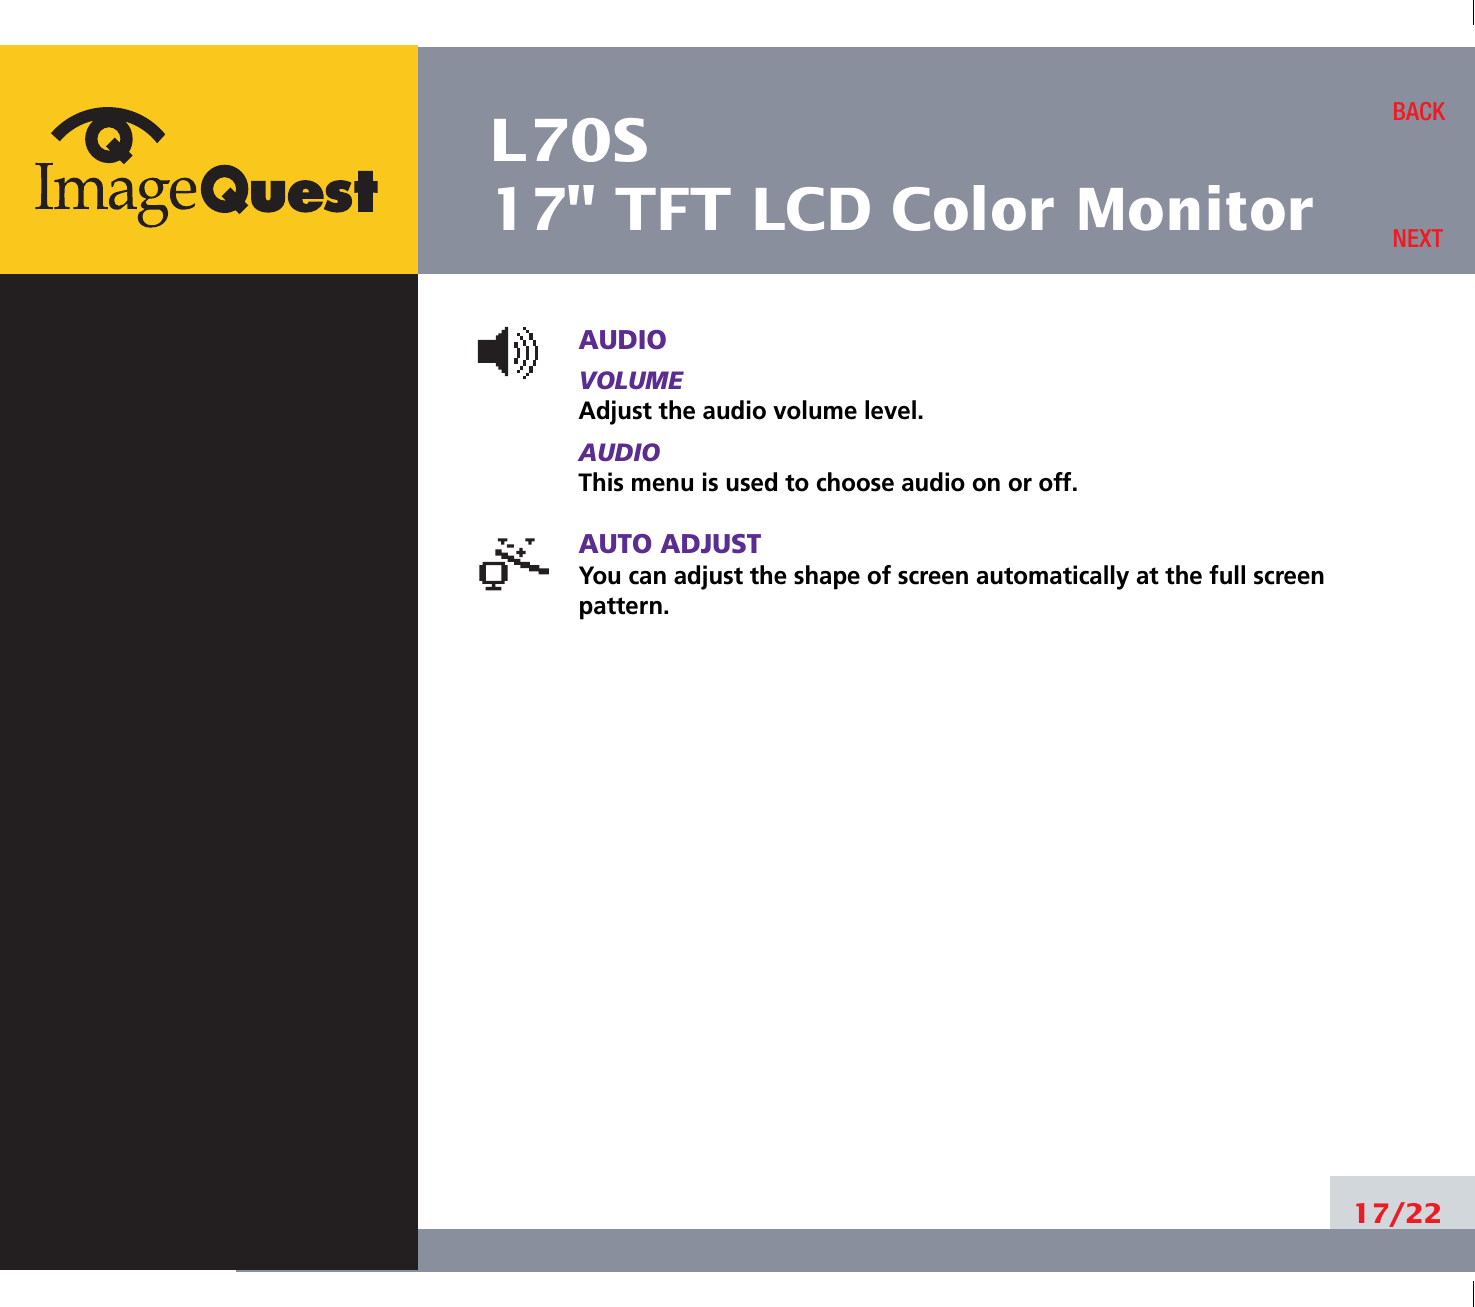 L70S17&quot; TFT LCD Color MonitorAUDIOVOLUMEAdjust the audio volume level.AUDIOThis menu is used to choose audio on or off.AUTO ADJUSTYou can adjust the shape of screen automatically at the full screenpattern.17/22BACKNEXT